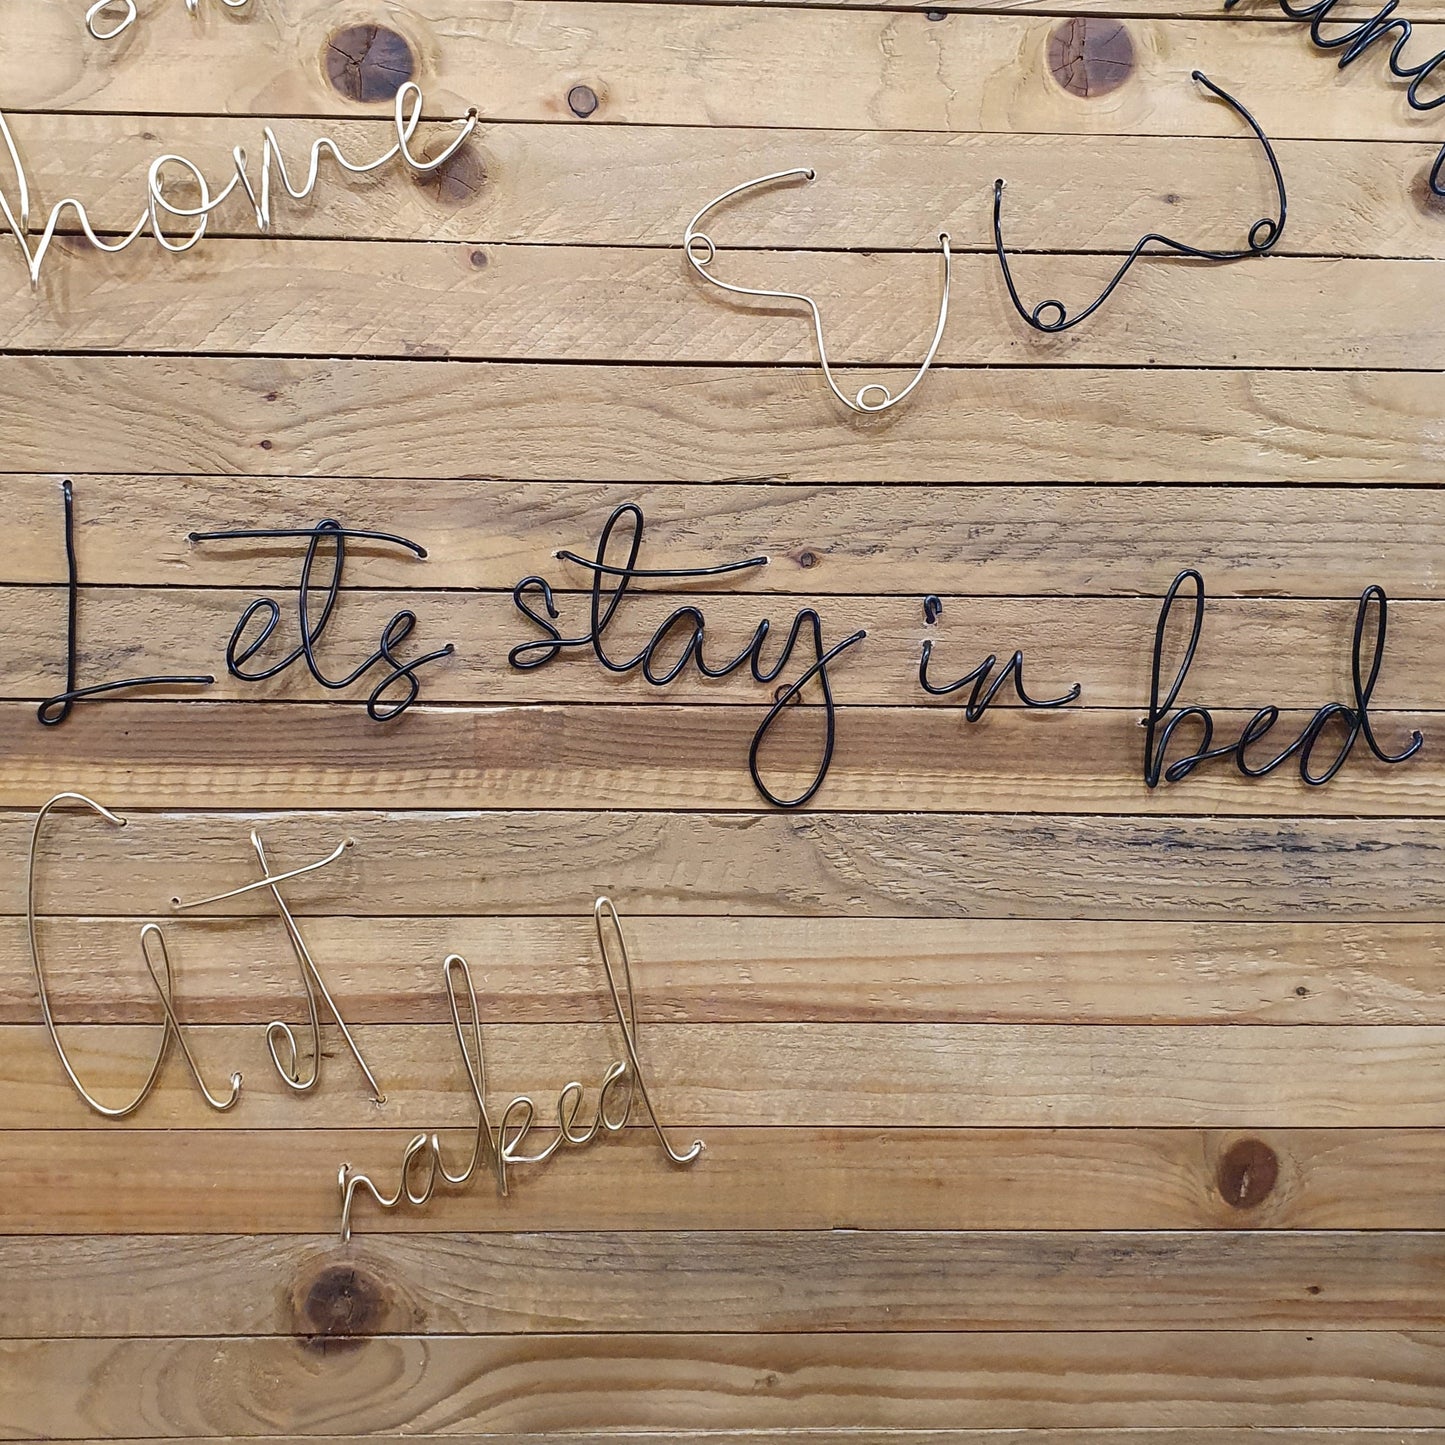 Black Lets Stay In Bed Wire Word Wall Art for hanging onto the wall. Wood Panel background.